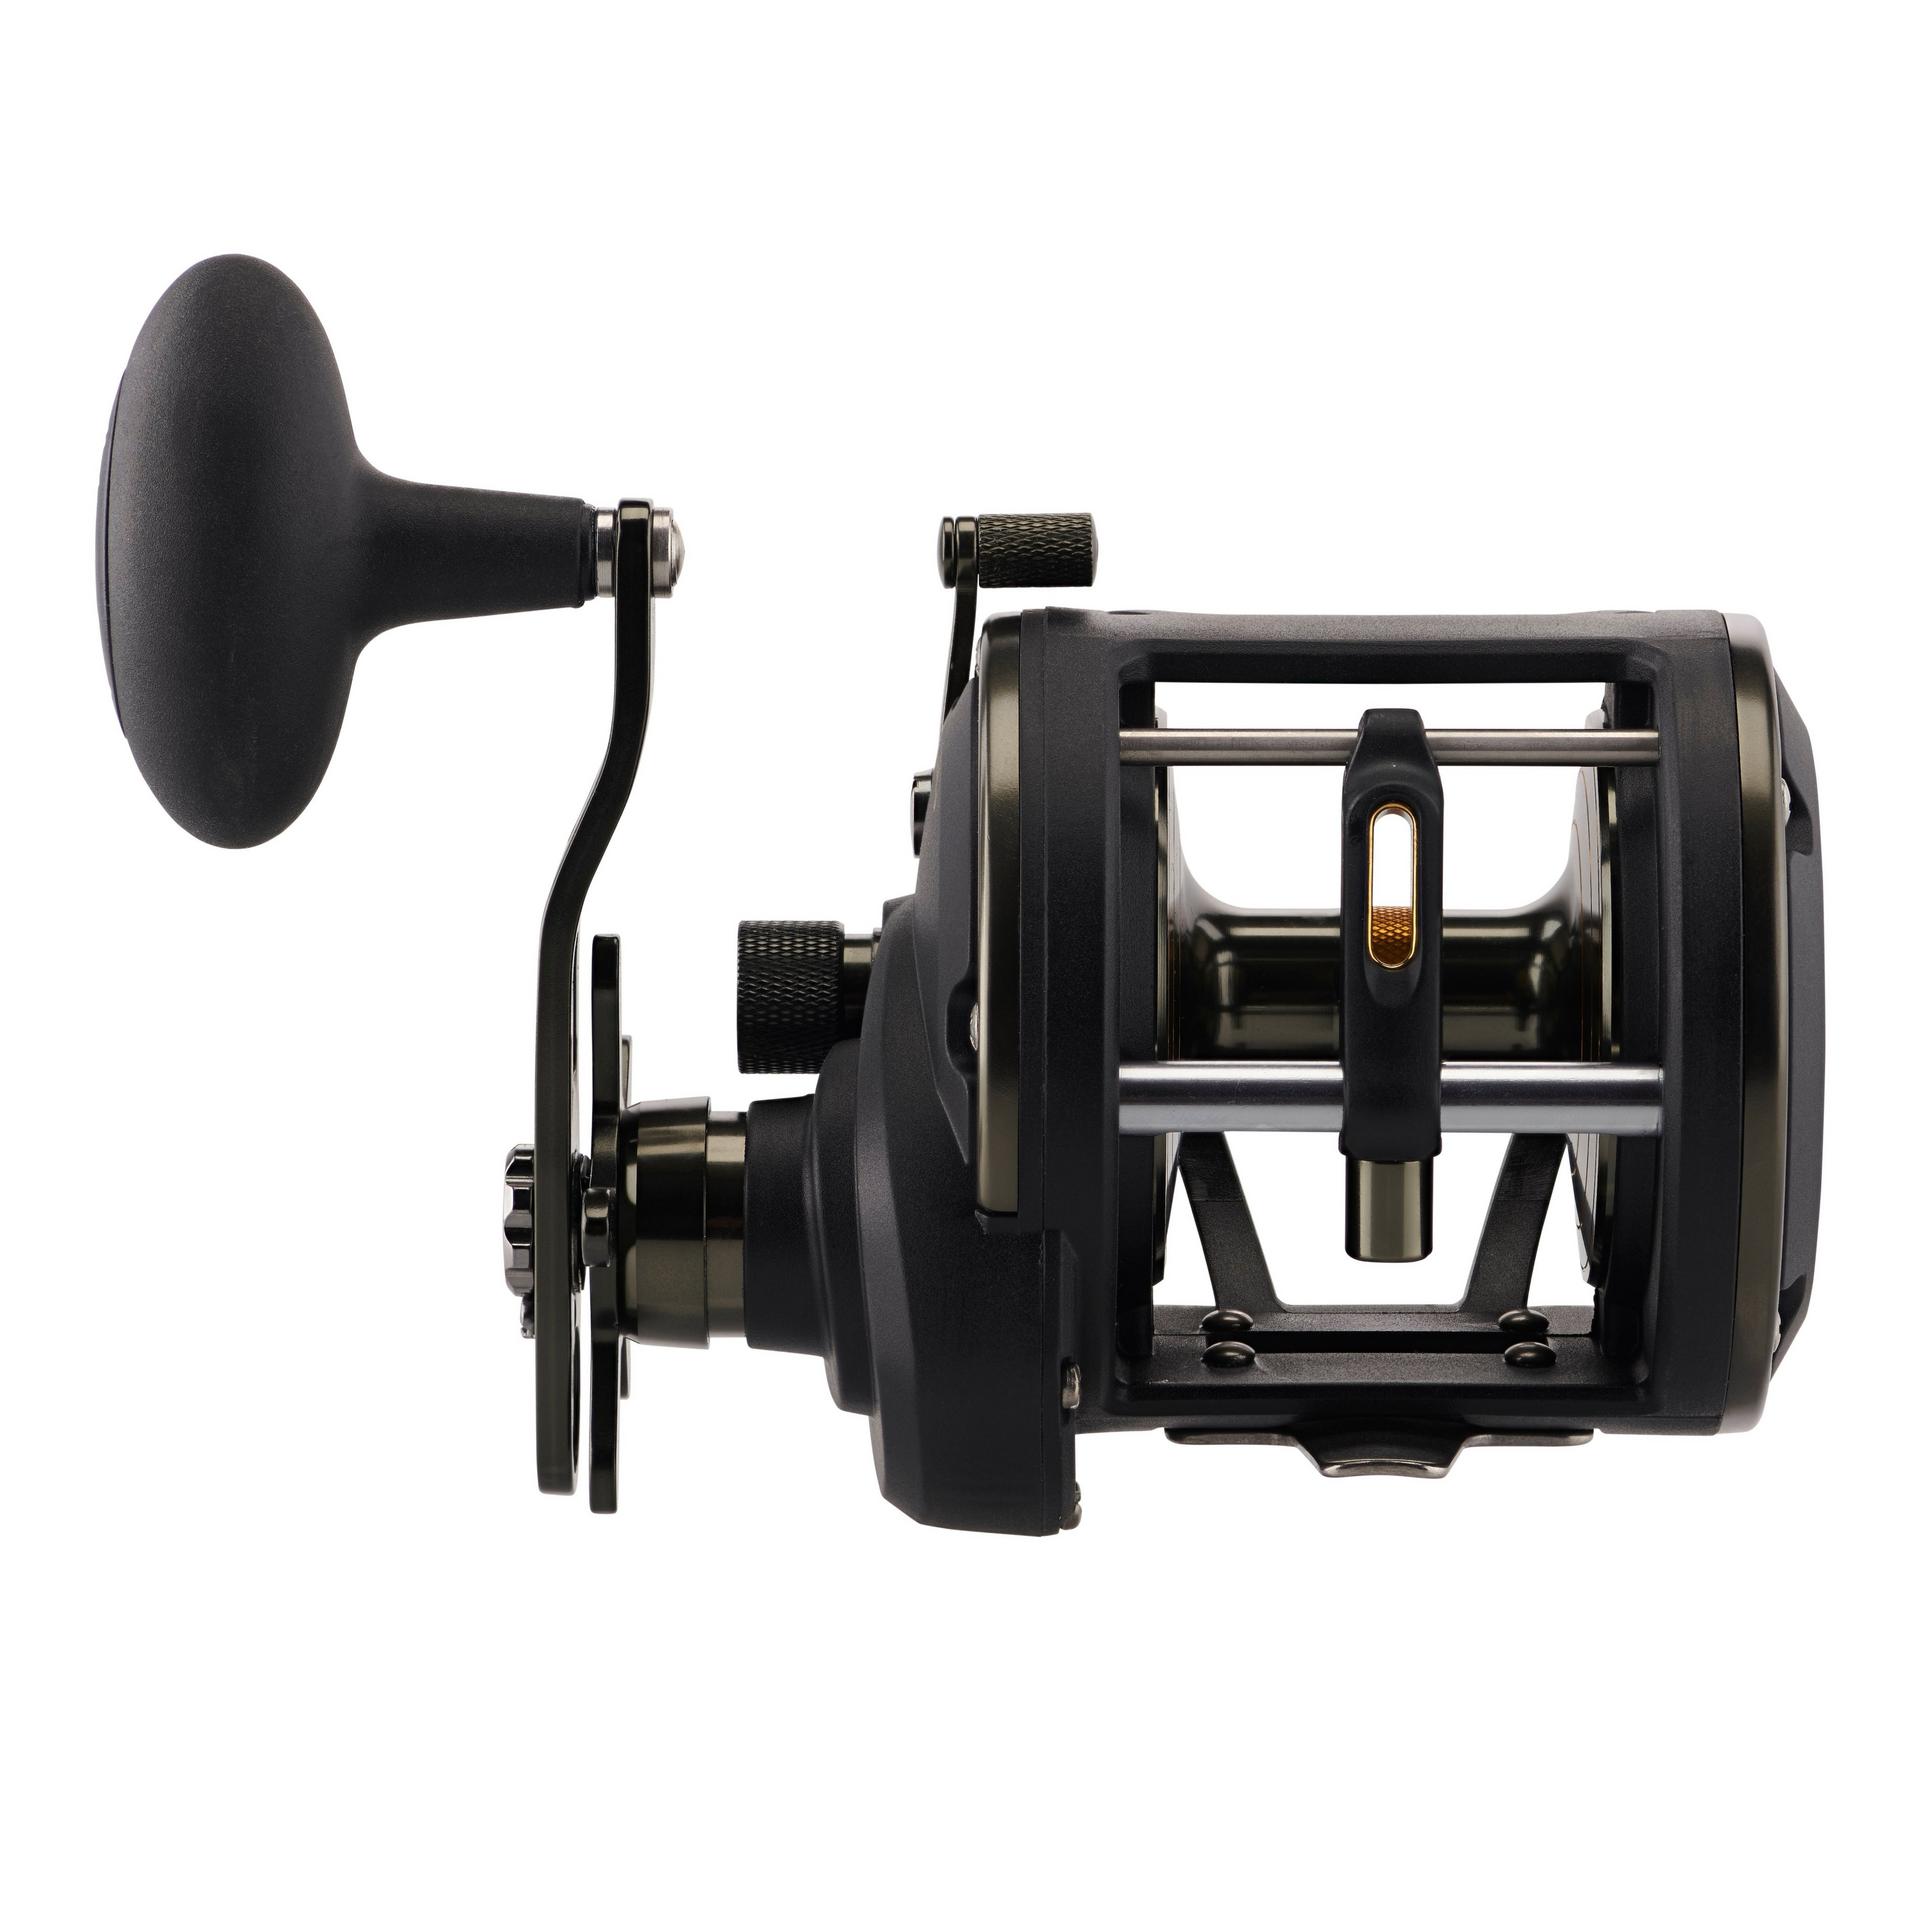 PENN Rival Level Wind Conventional Fishing Reel, Size 20